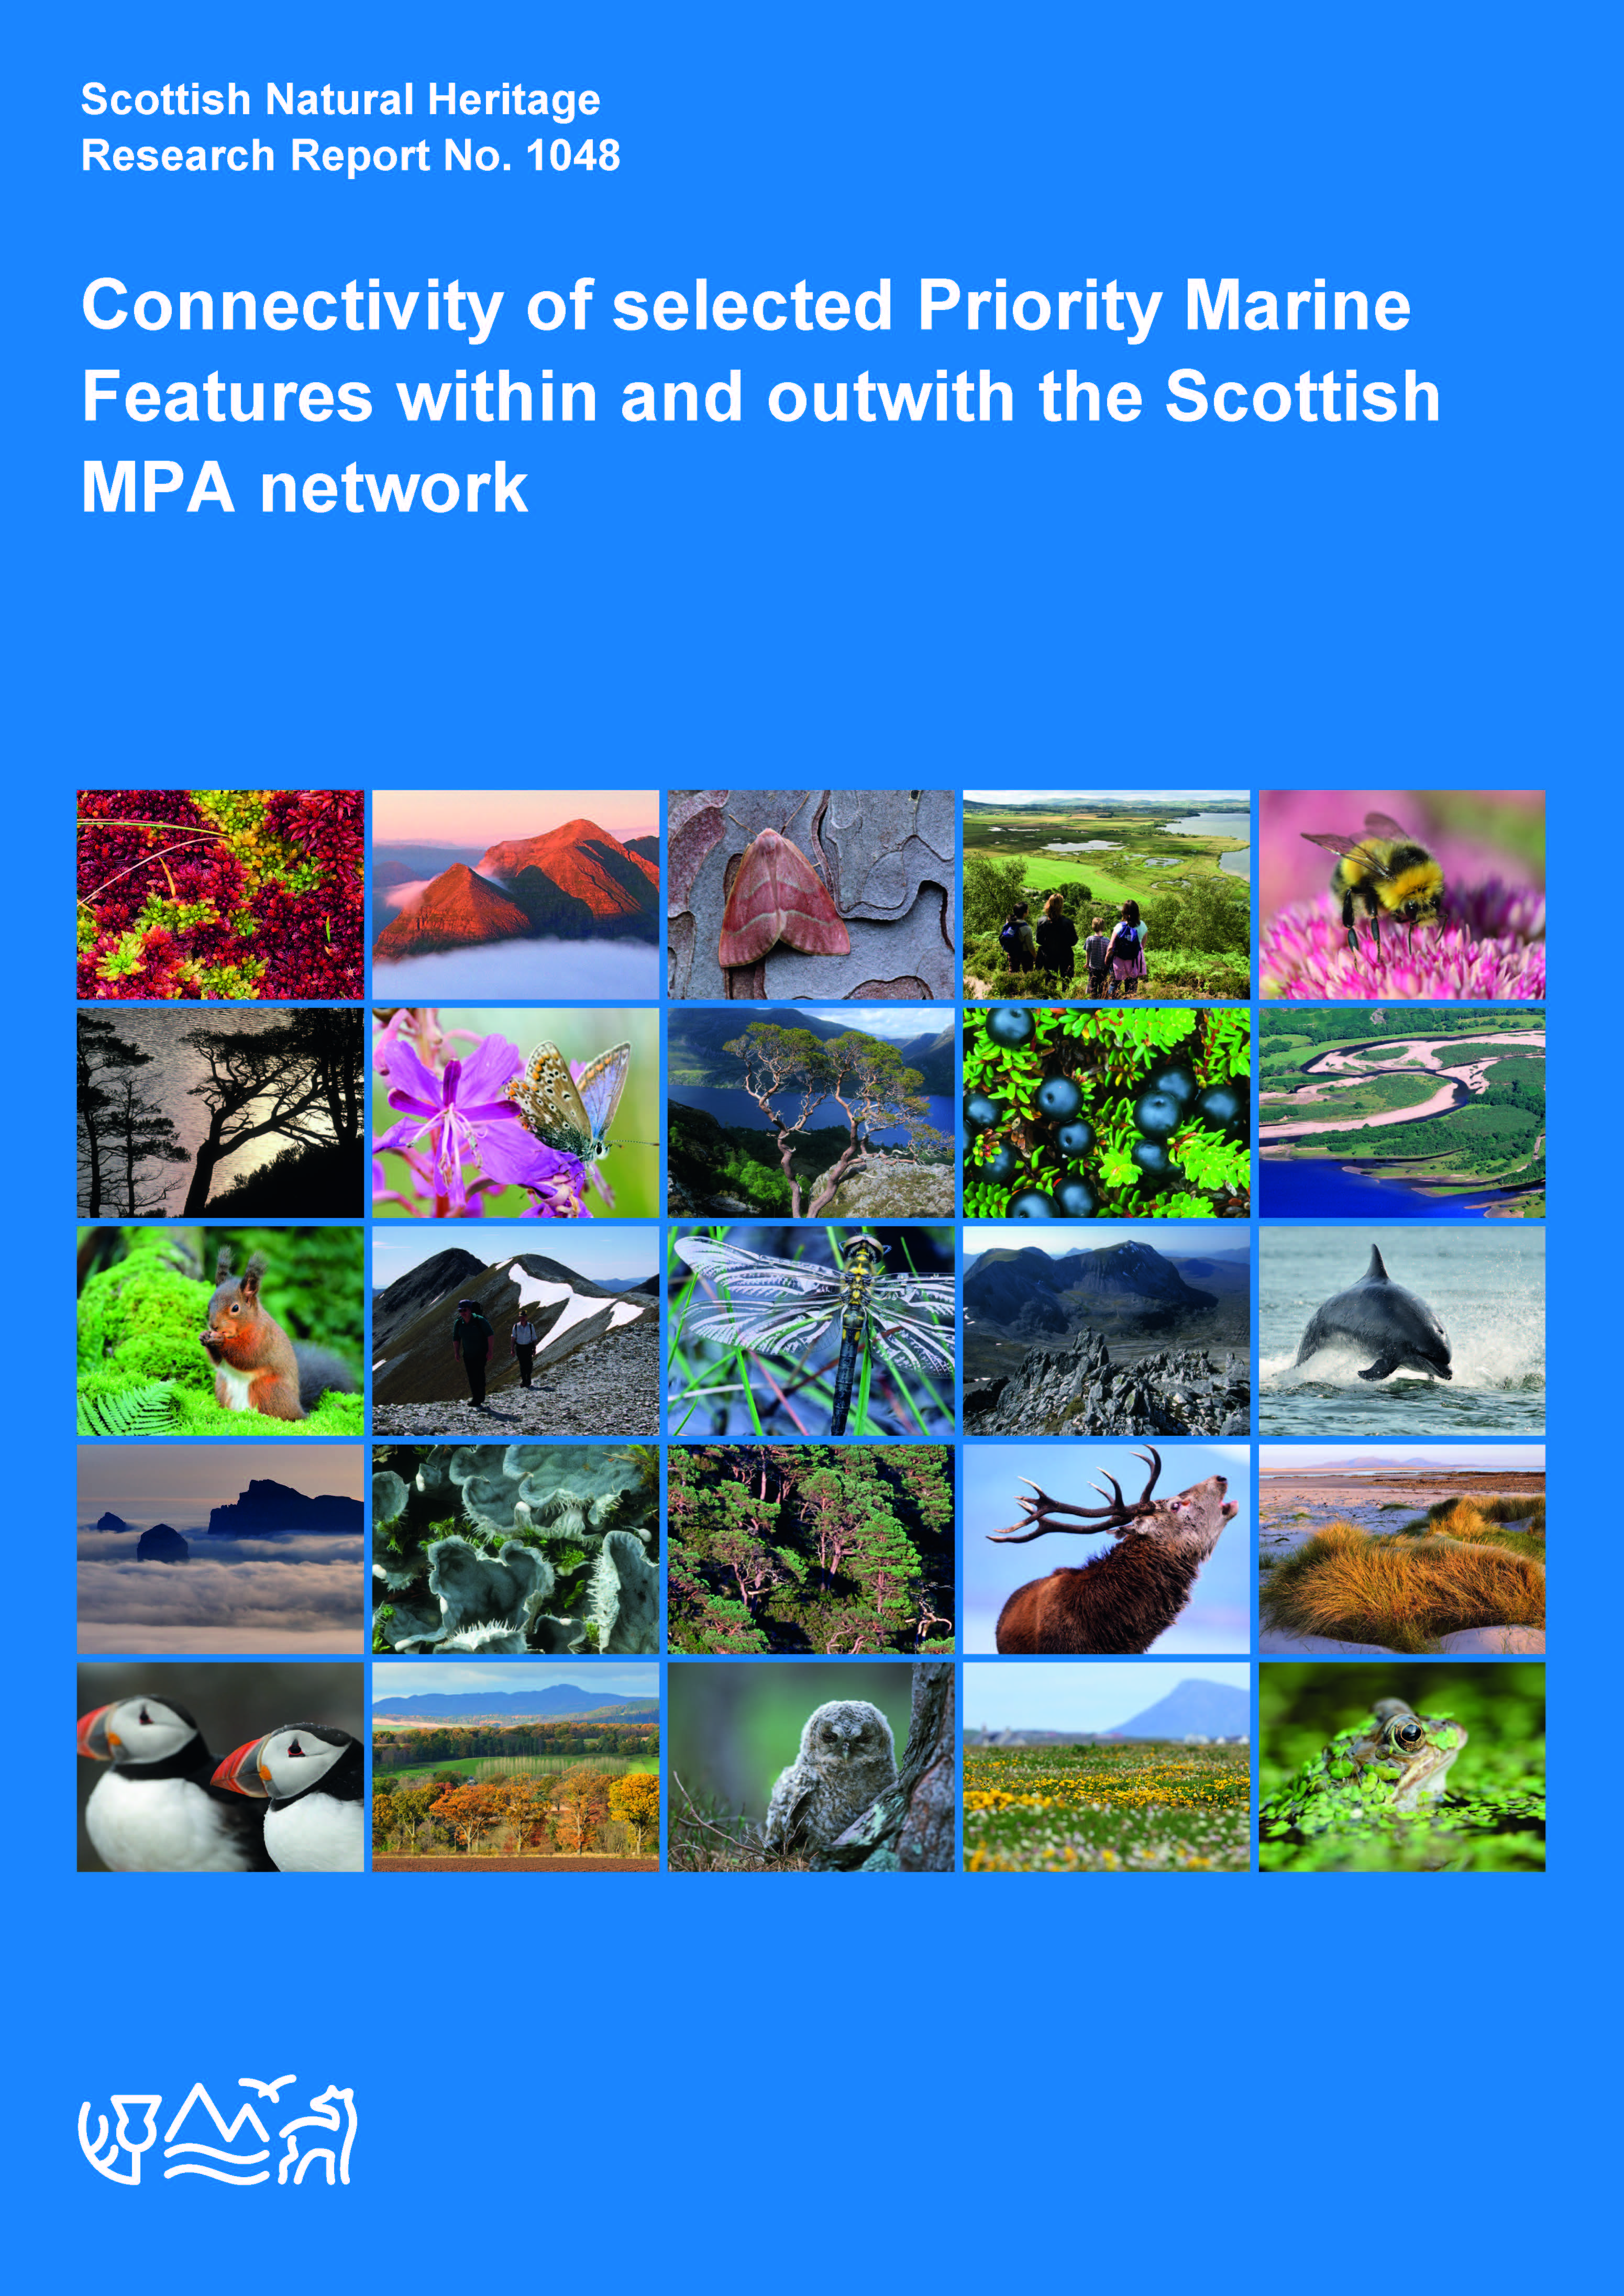 Front cover of  Research Report 1048 - Connectivity of selected Priority Marine Features within and outwith the Scottish MPA network